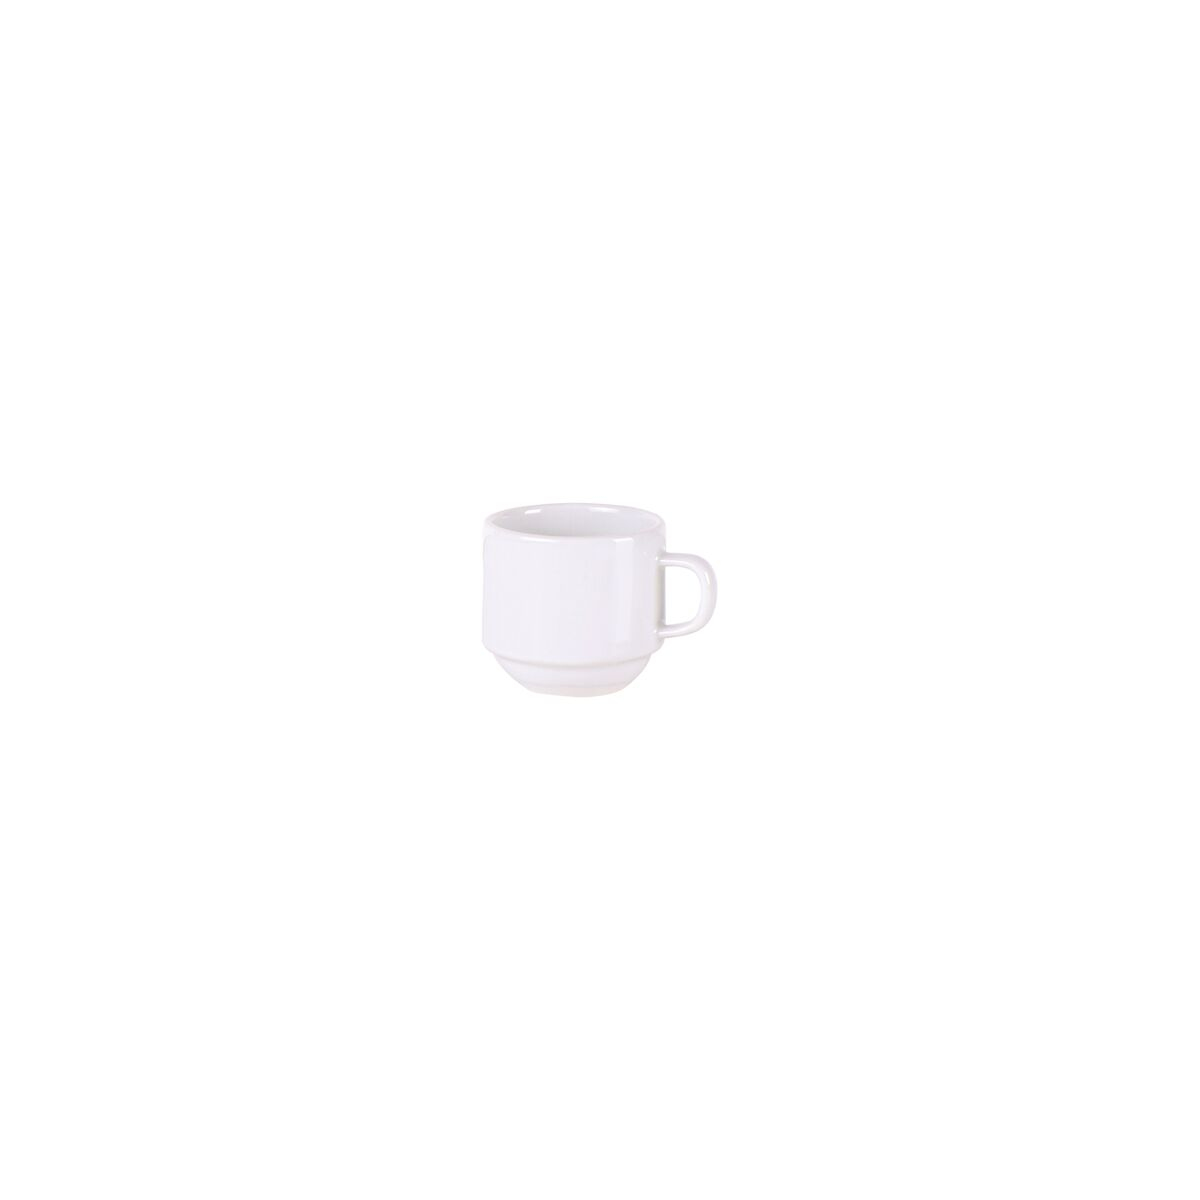 Tramontina Paola 100 ml Porcelain Coffee Cup